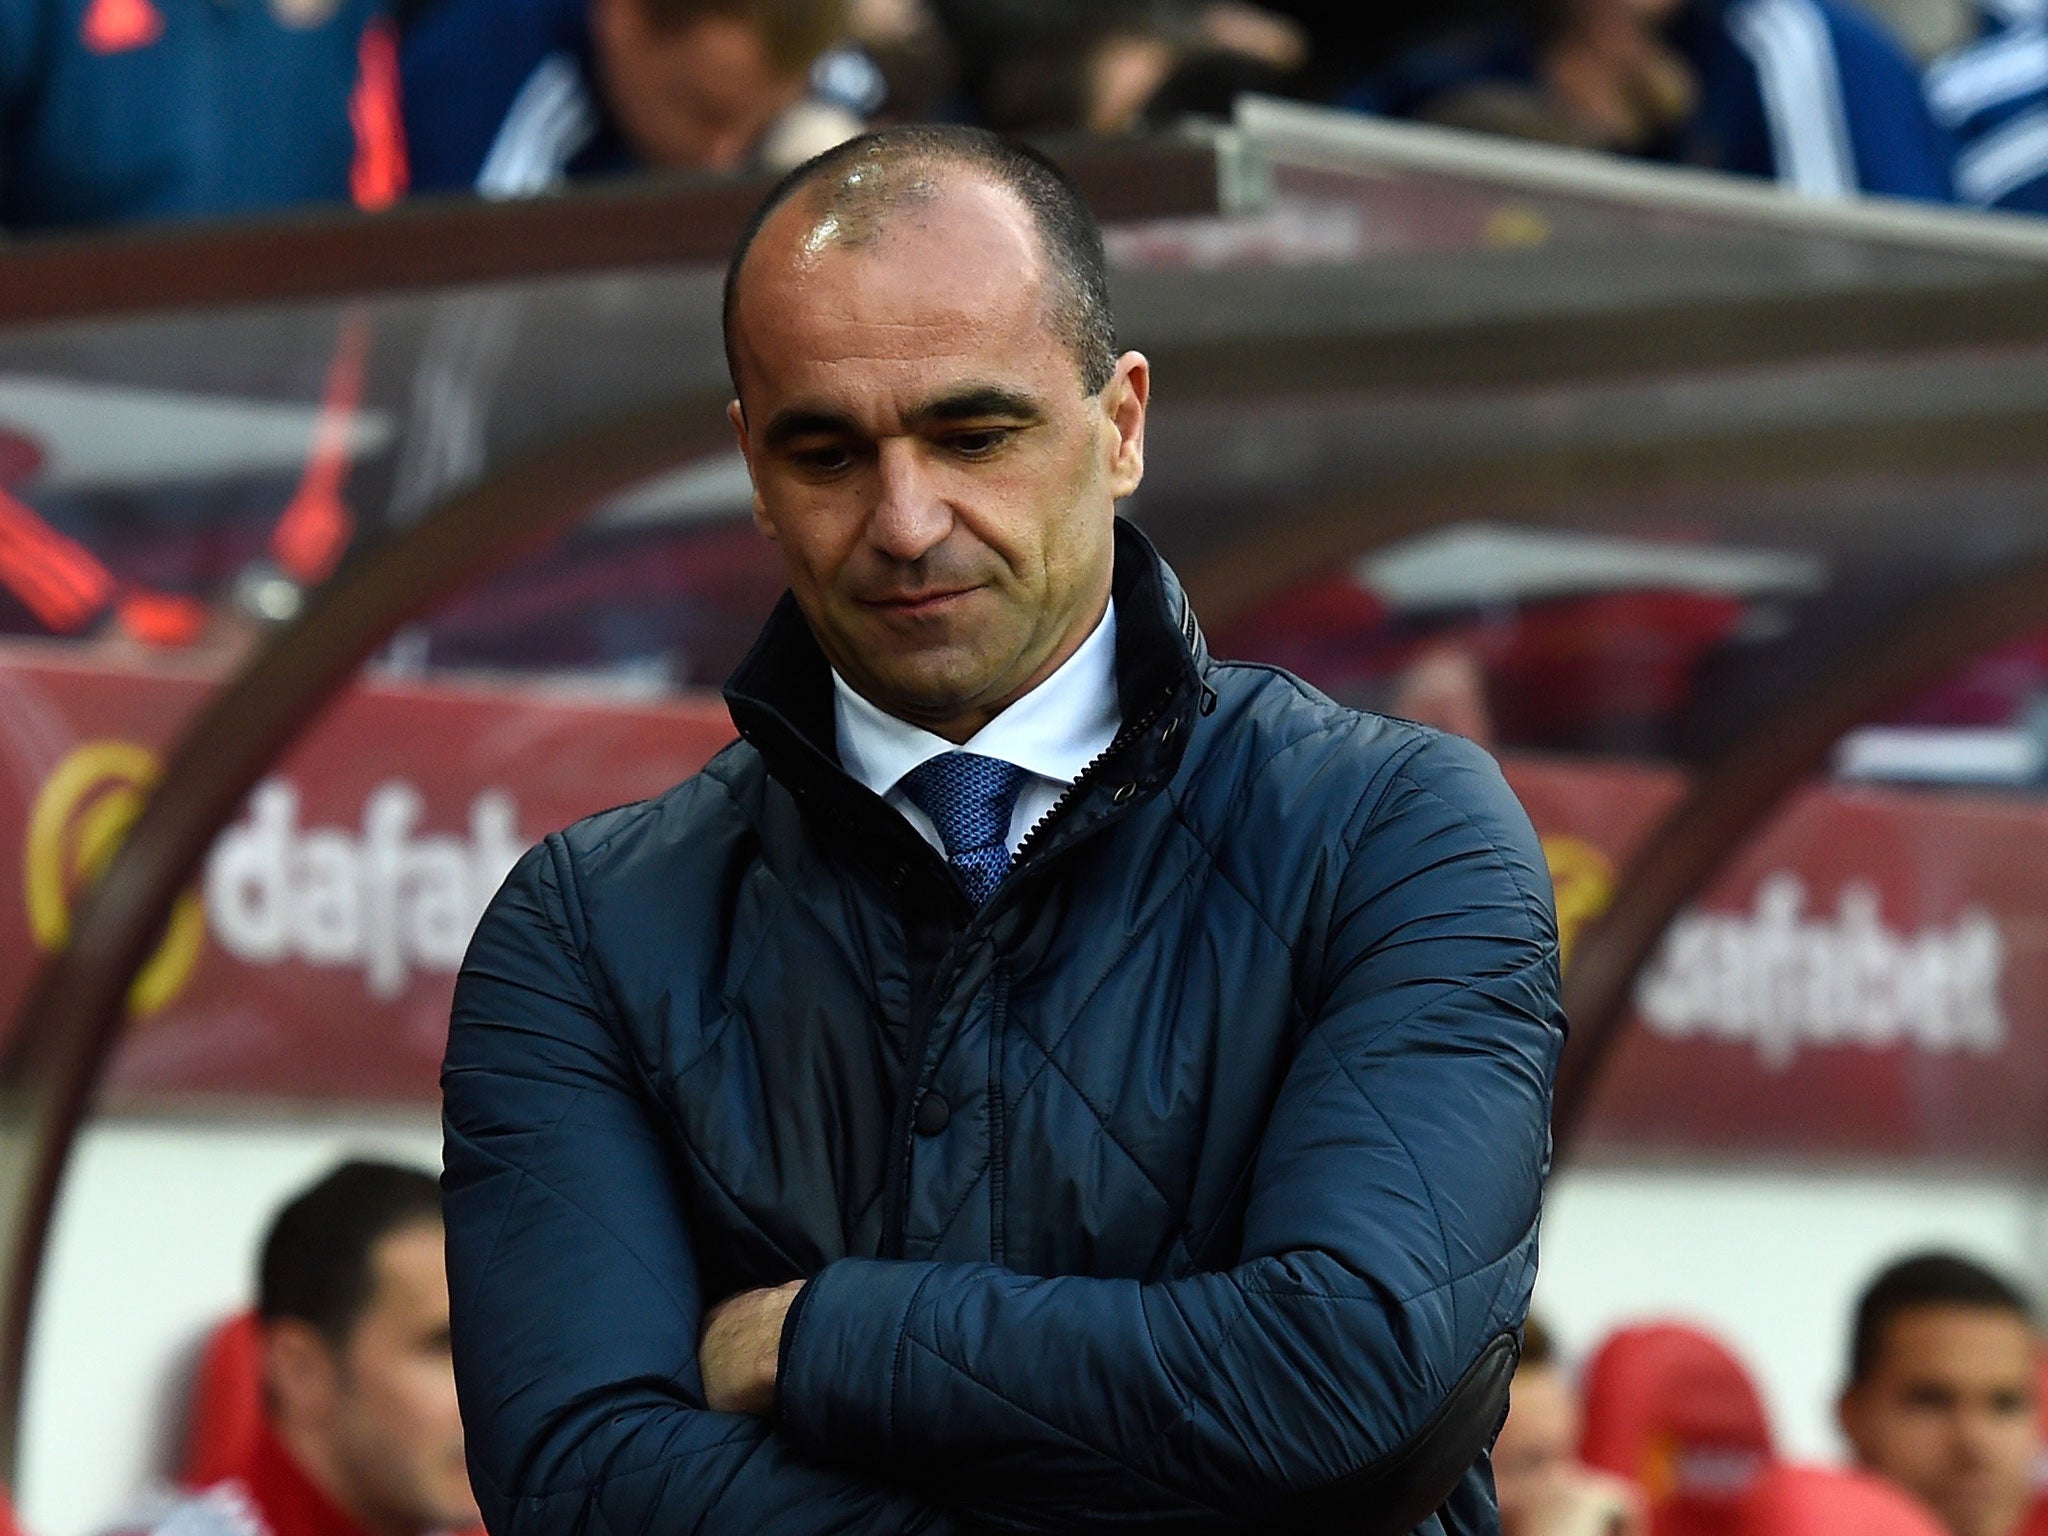 Roberto Martinez paid the price for a poor season with Everton with the sack last week